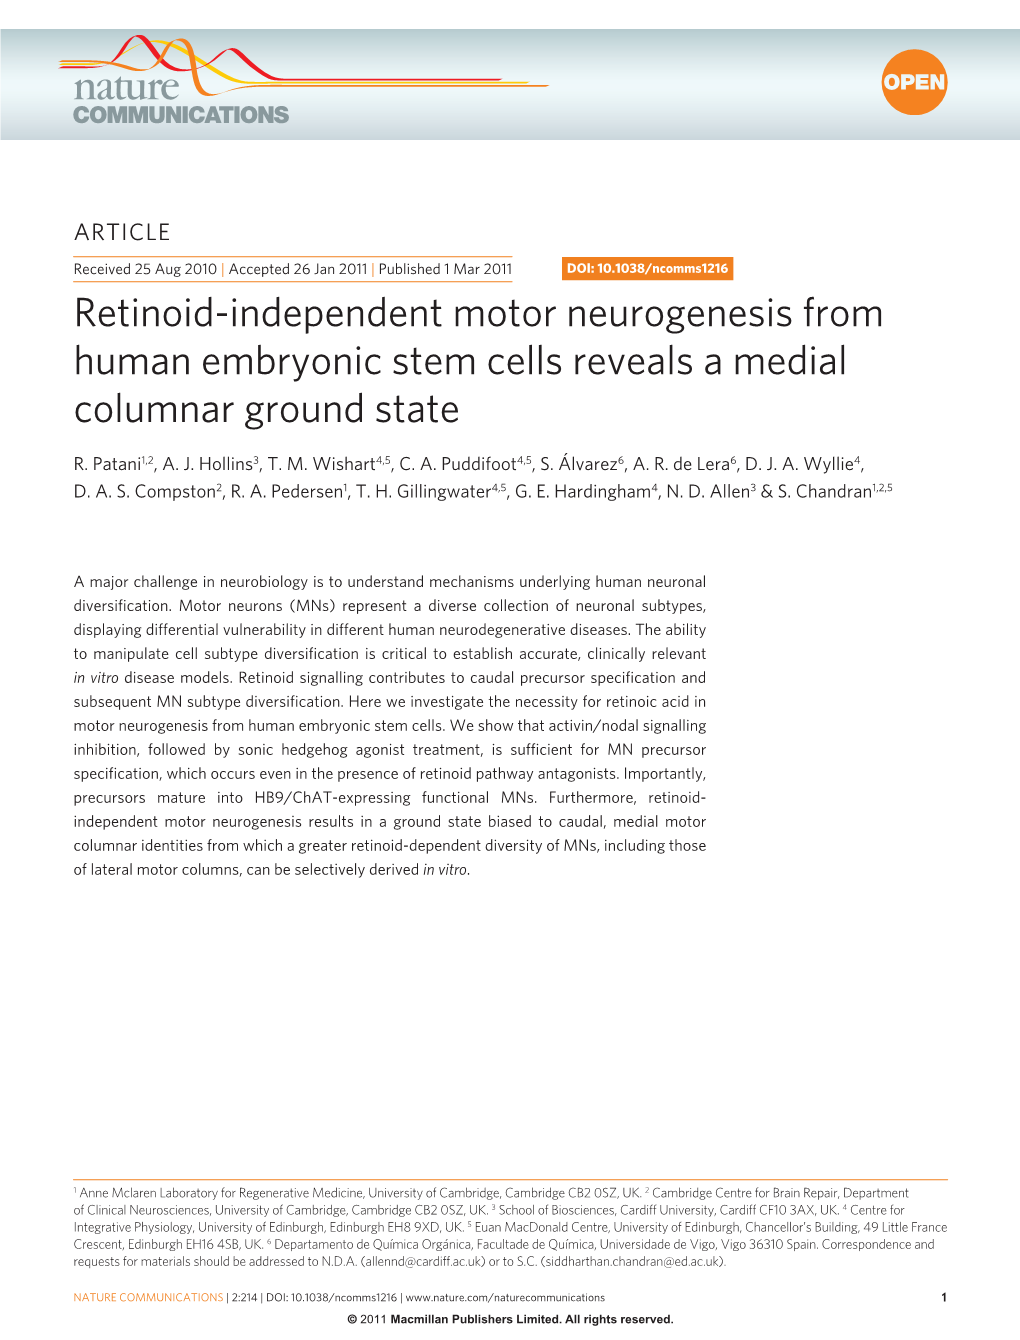 Retinoid-Independent Motor Neurogenesis from Human Embryonic Stem Cells Reveals a Medial Columnar Ground State